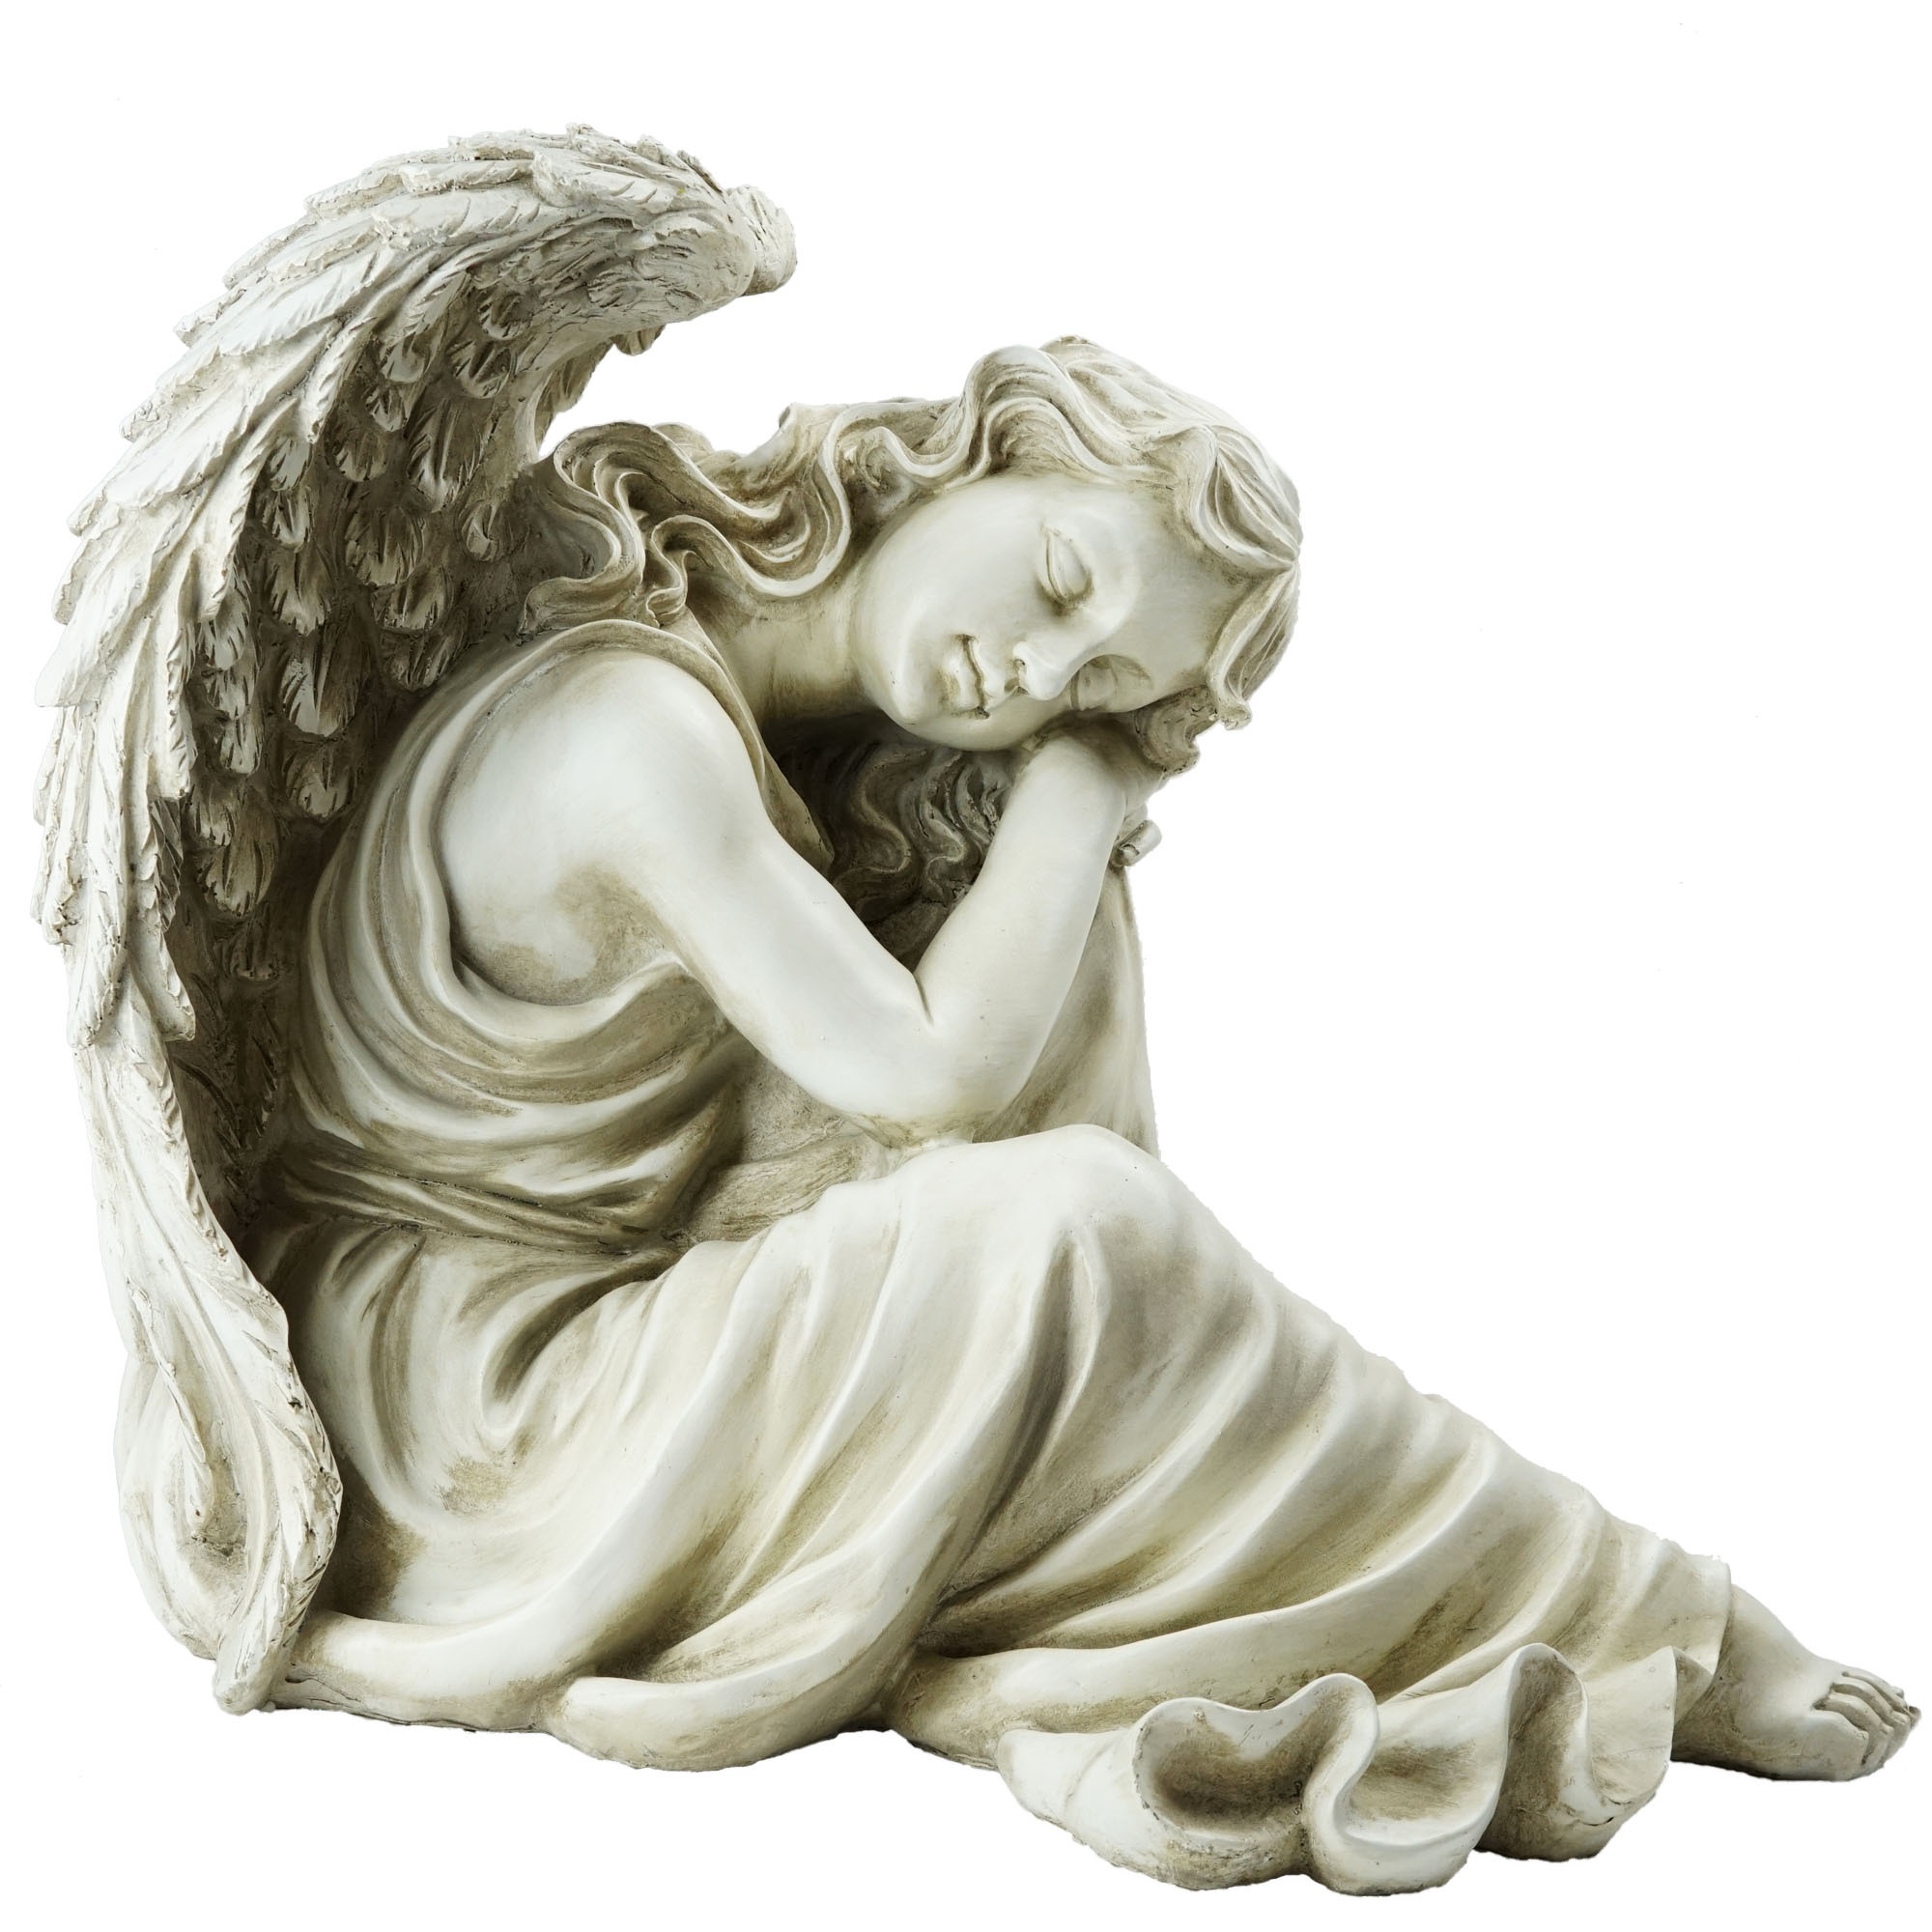 Northlight 19" Resting Angel Religious Outdoor Patio Garden Statue - Ivory - image 1 of 4